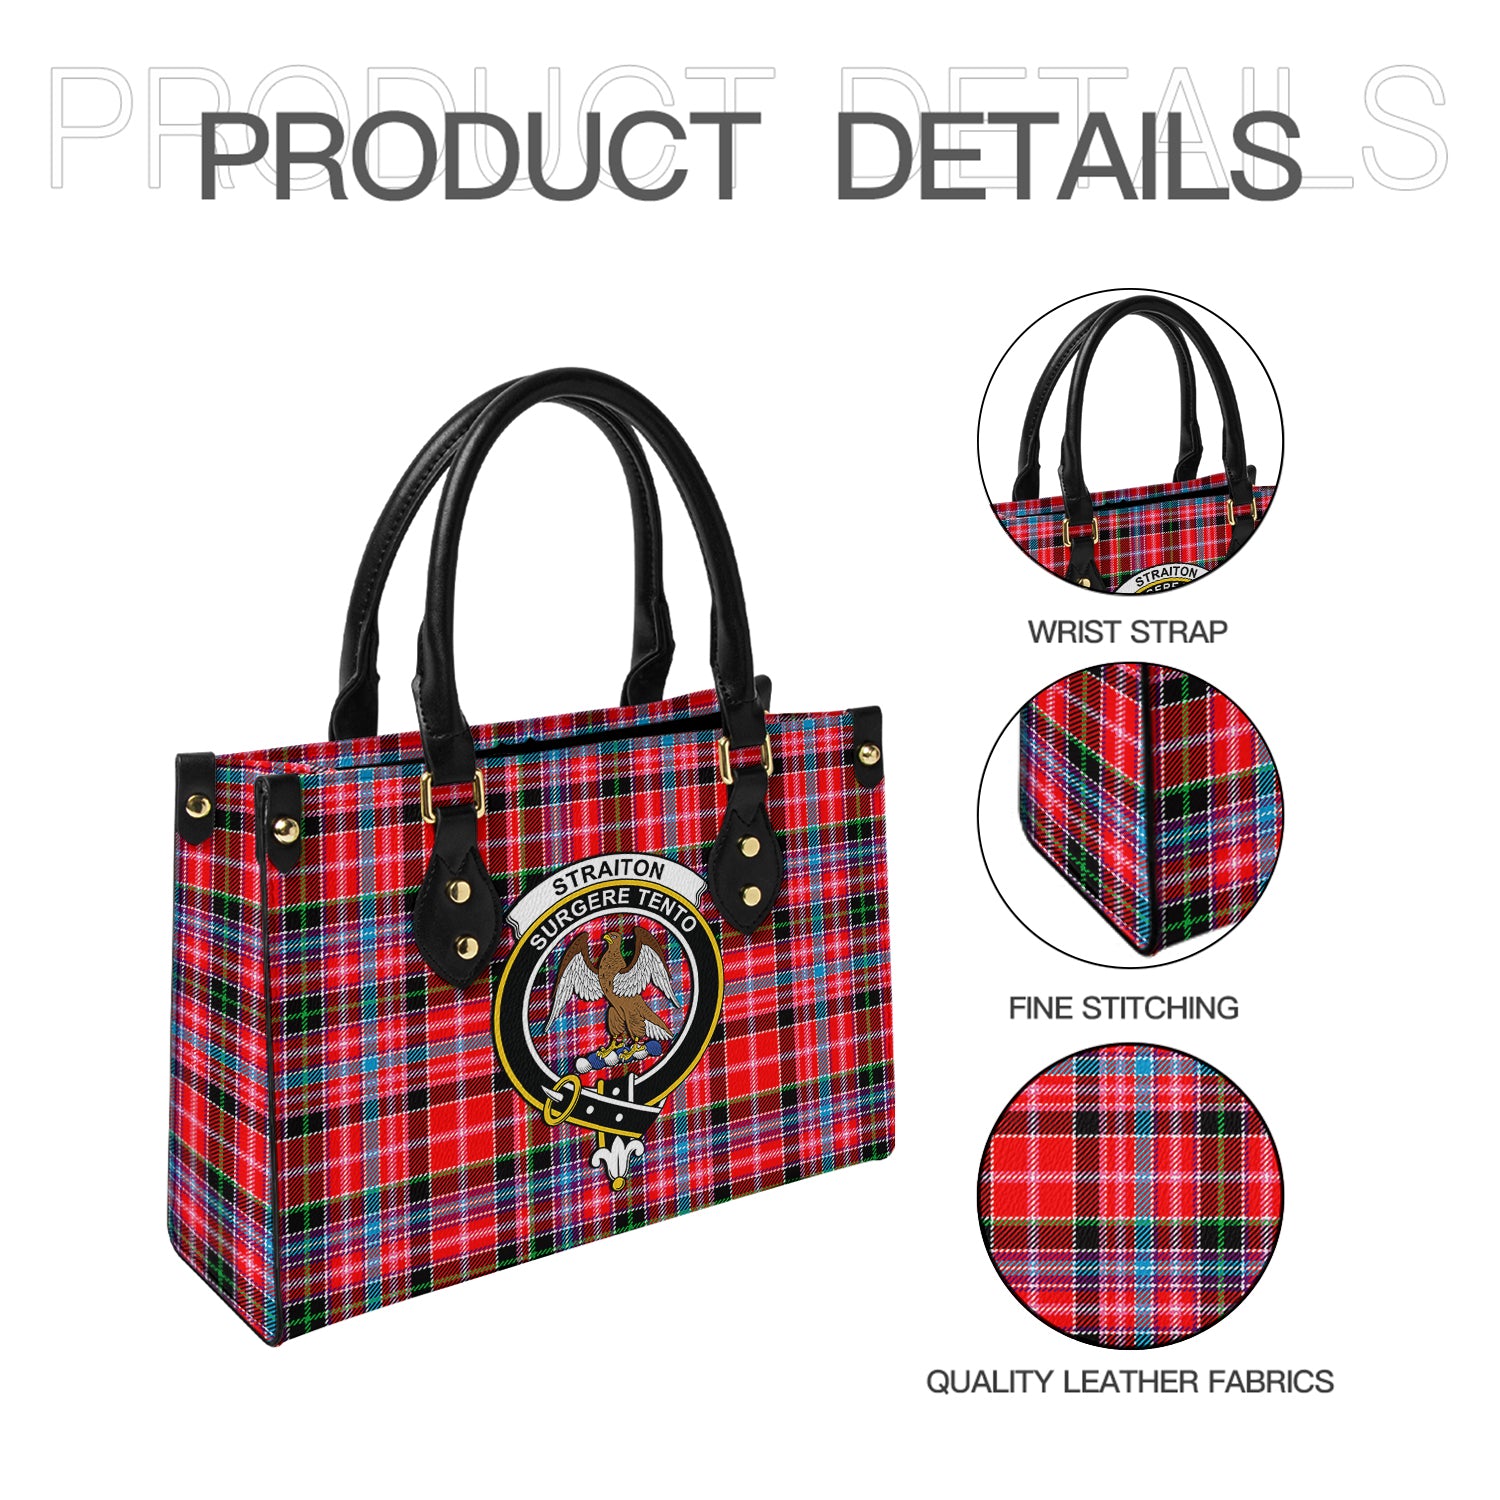 straiton-tartan-leather-bag-with-family-crest